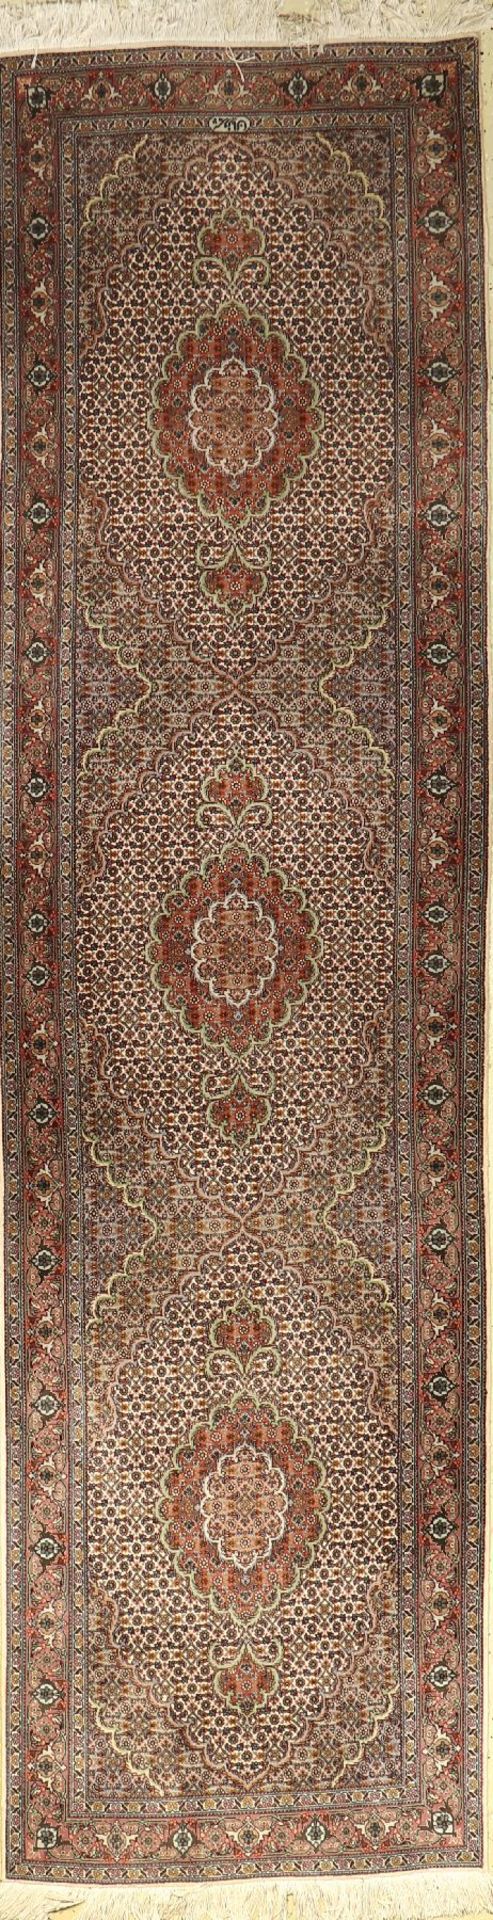 Tabriz fine runner, Persia, approx. 30 years, wool with silk, approx. 300 x 81 cm, condition: 2.